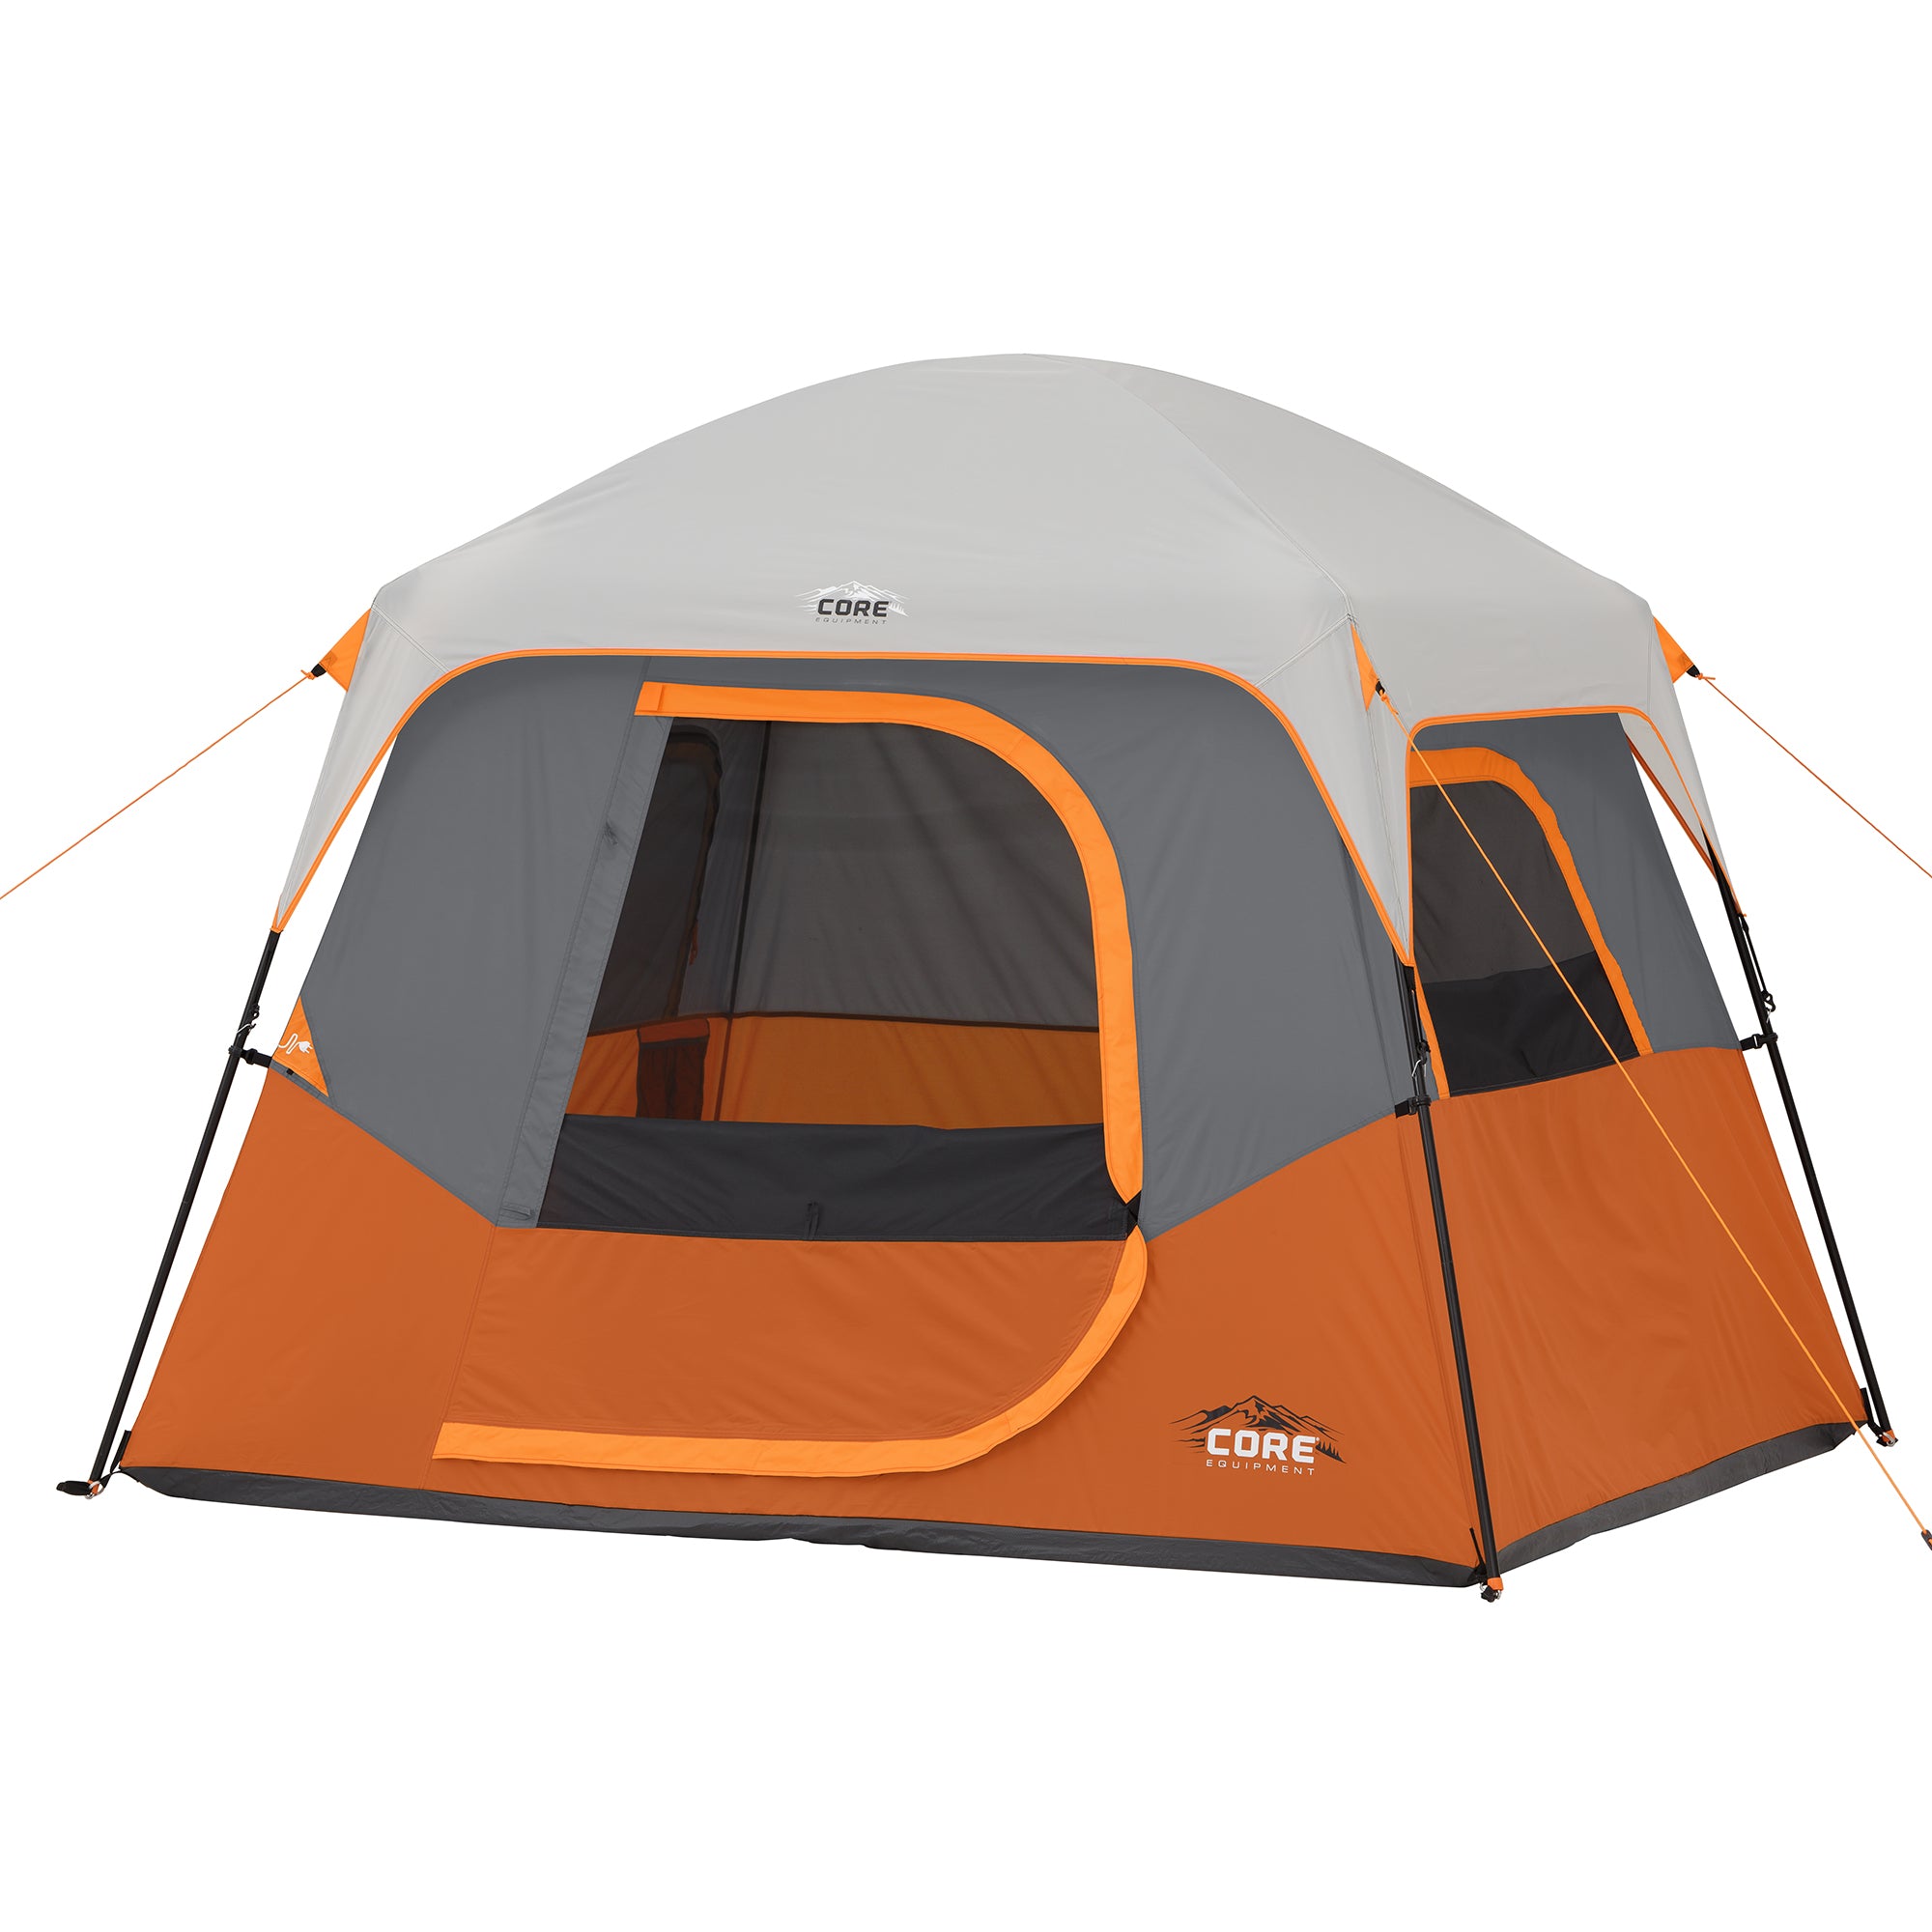 4 Person Outdoor Hiking Camping Tent w/ Rainfly Awning, 9' x 7